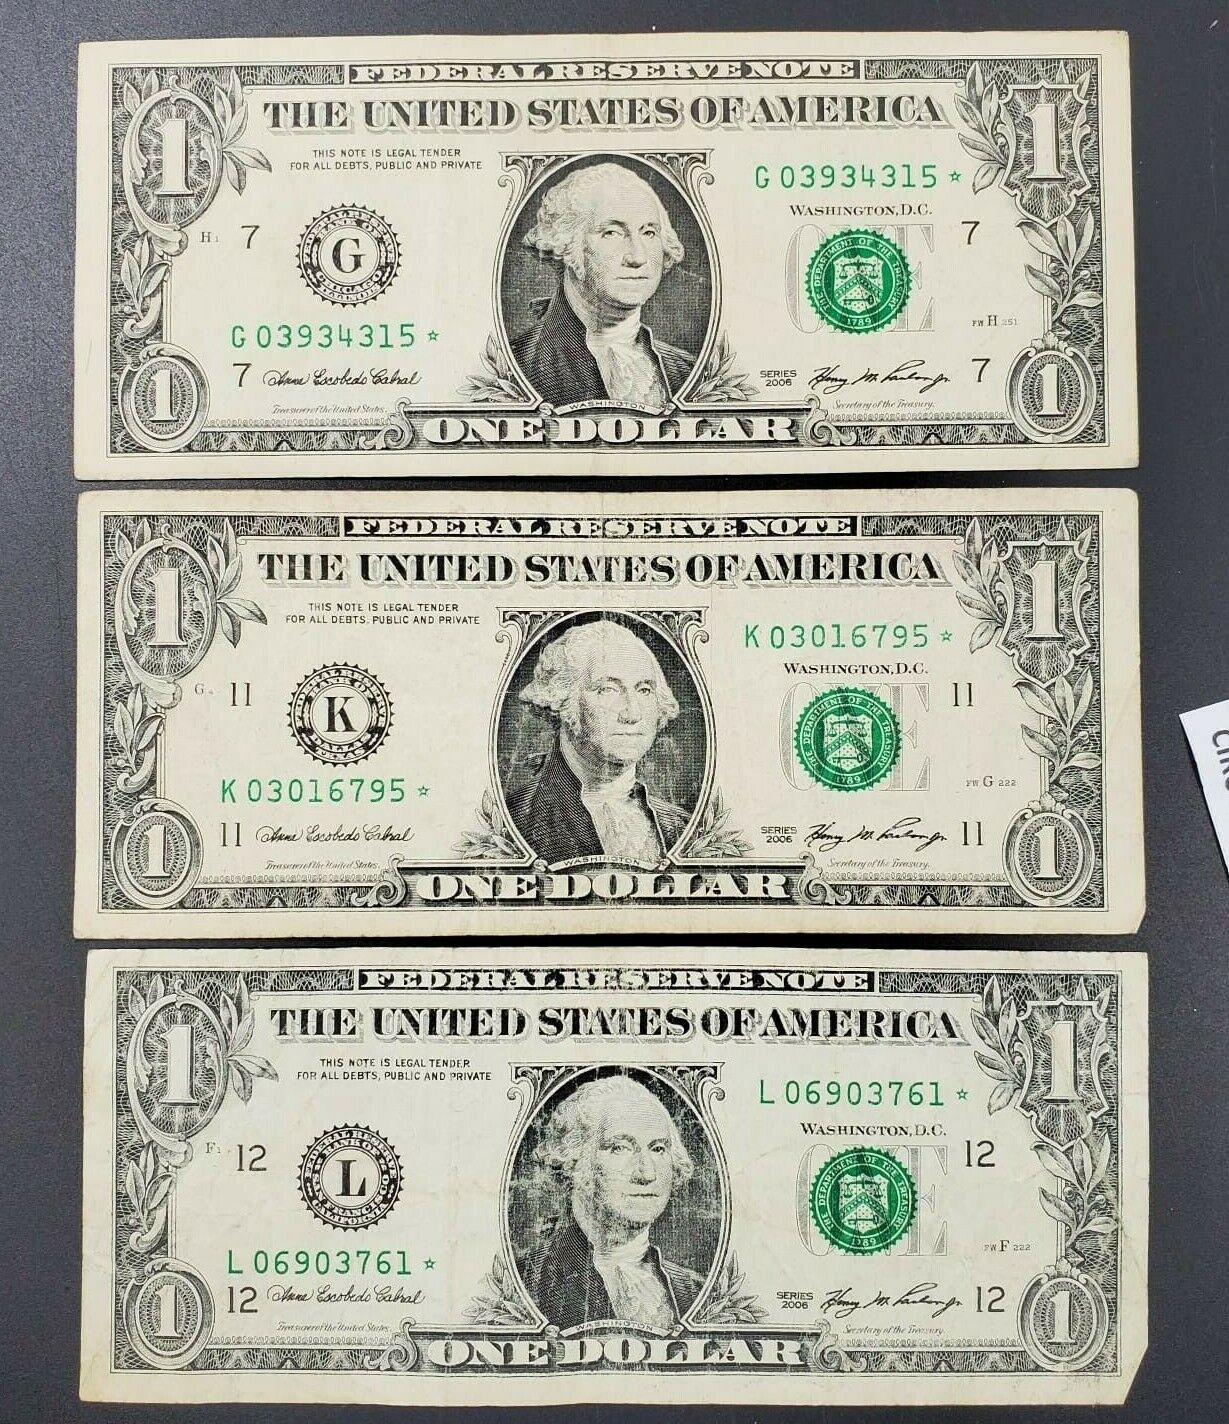 3 NOTE LOT 2006 $1 * Star BILLS FRN Federal Reserve Replacement Neat Serial #s